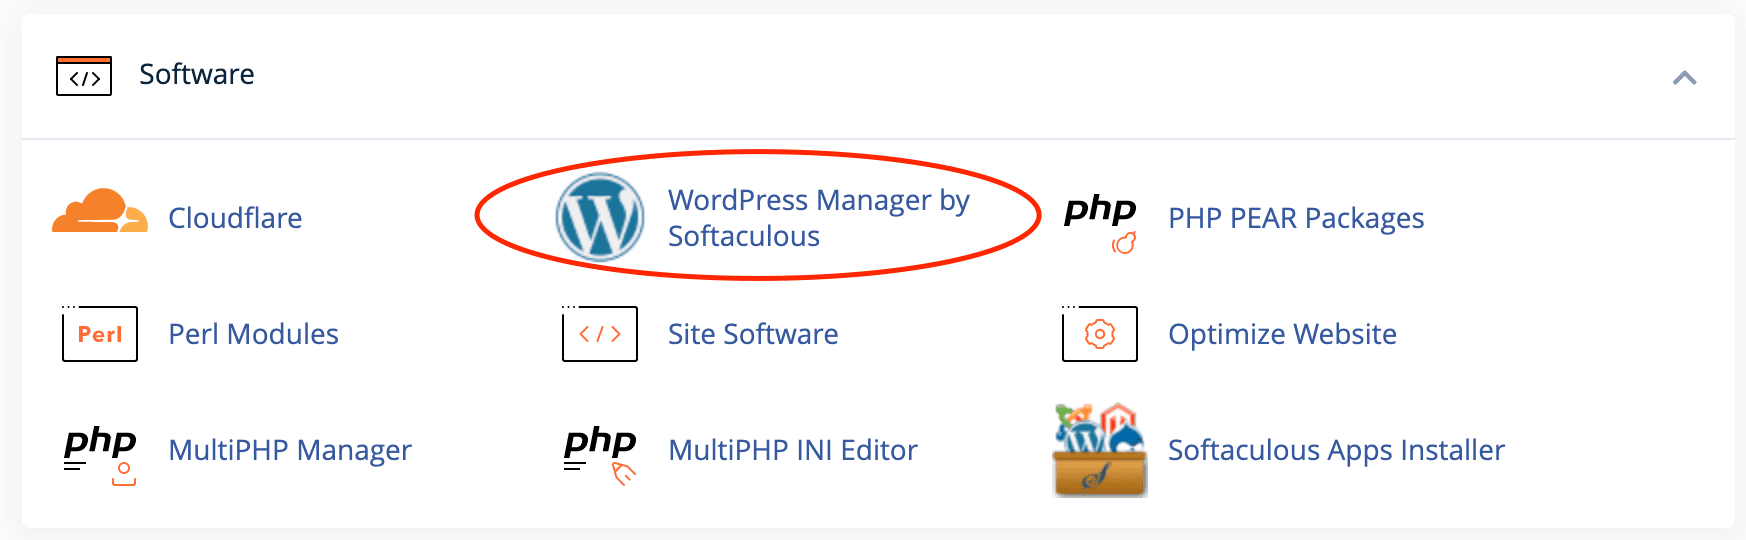 Installing WordPress from cpanel via Softaculous